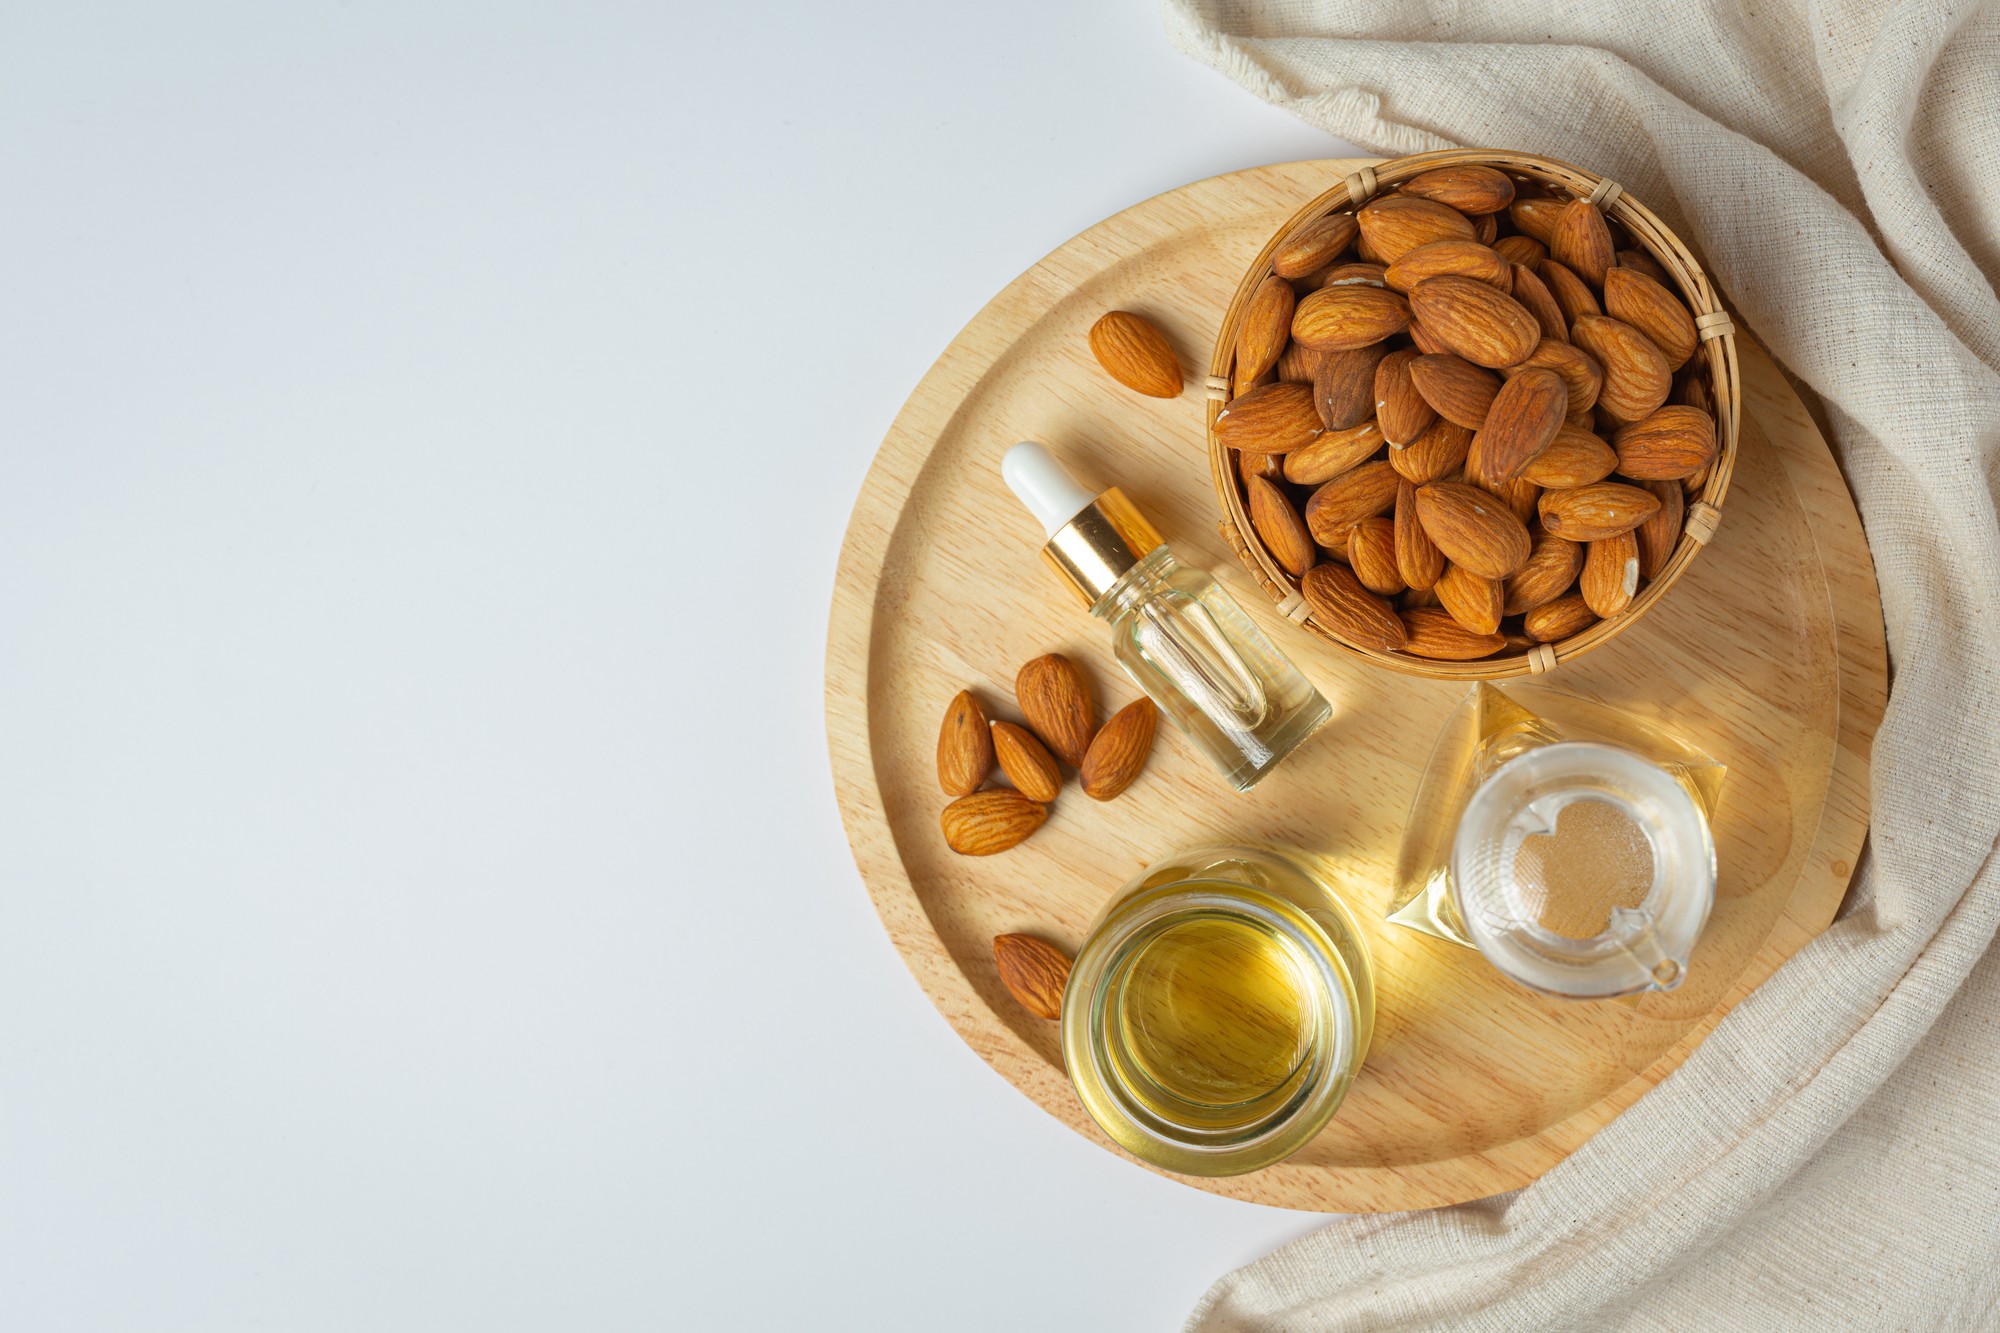 How To Use Almond Oil To Your Eyes To Help Reduce Dark Circles?﻿